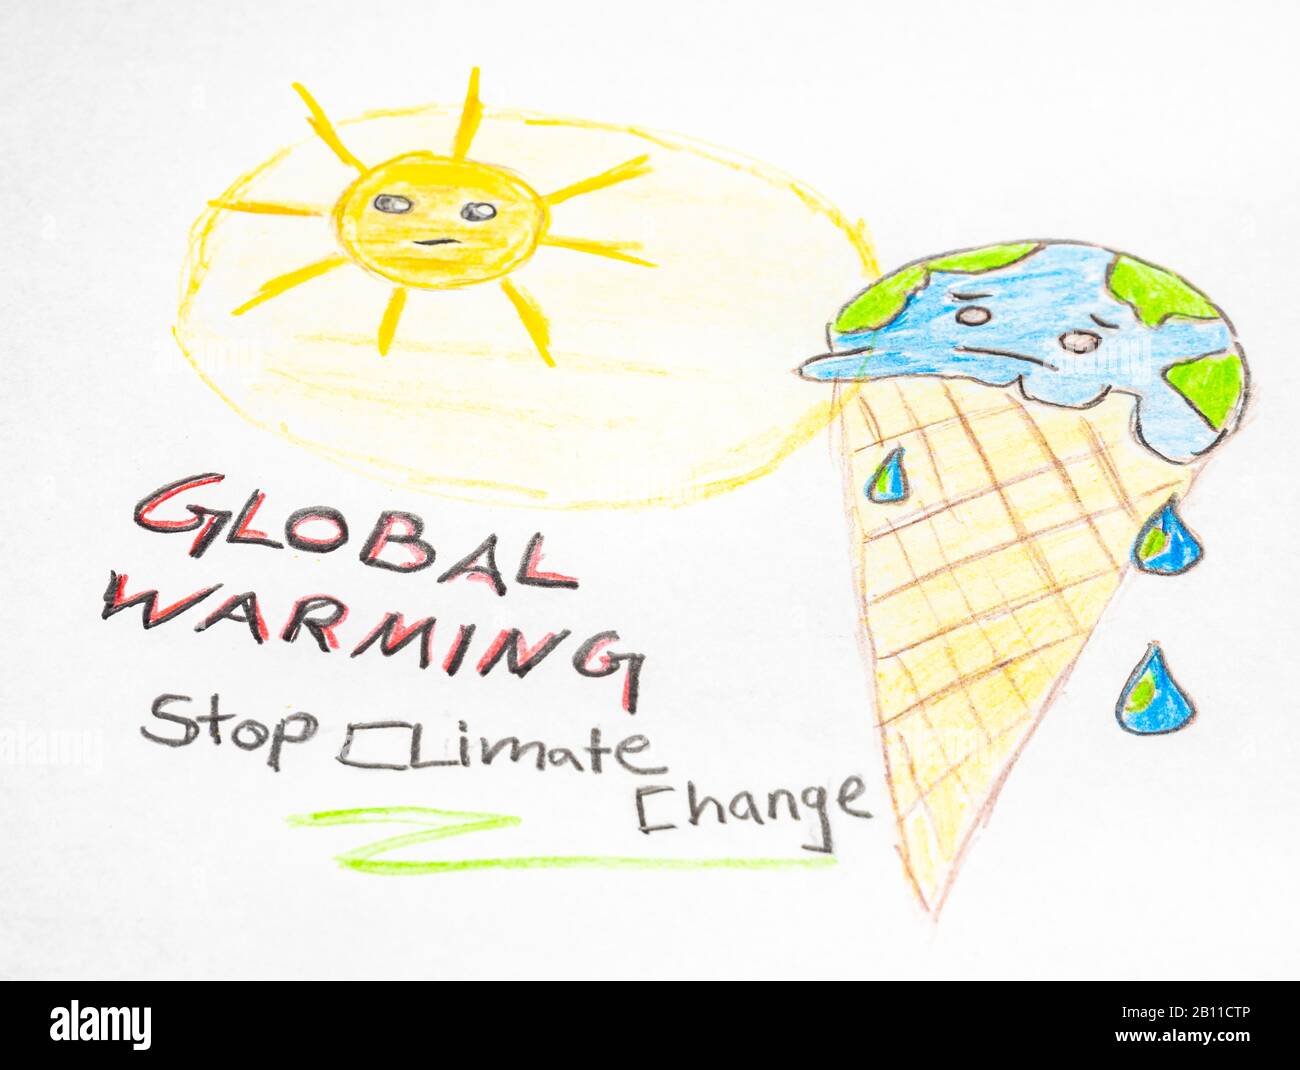 Global Warming Stop Climate Change Stock Photo